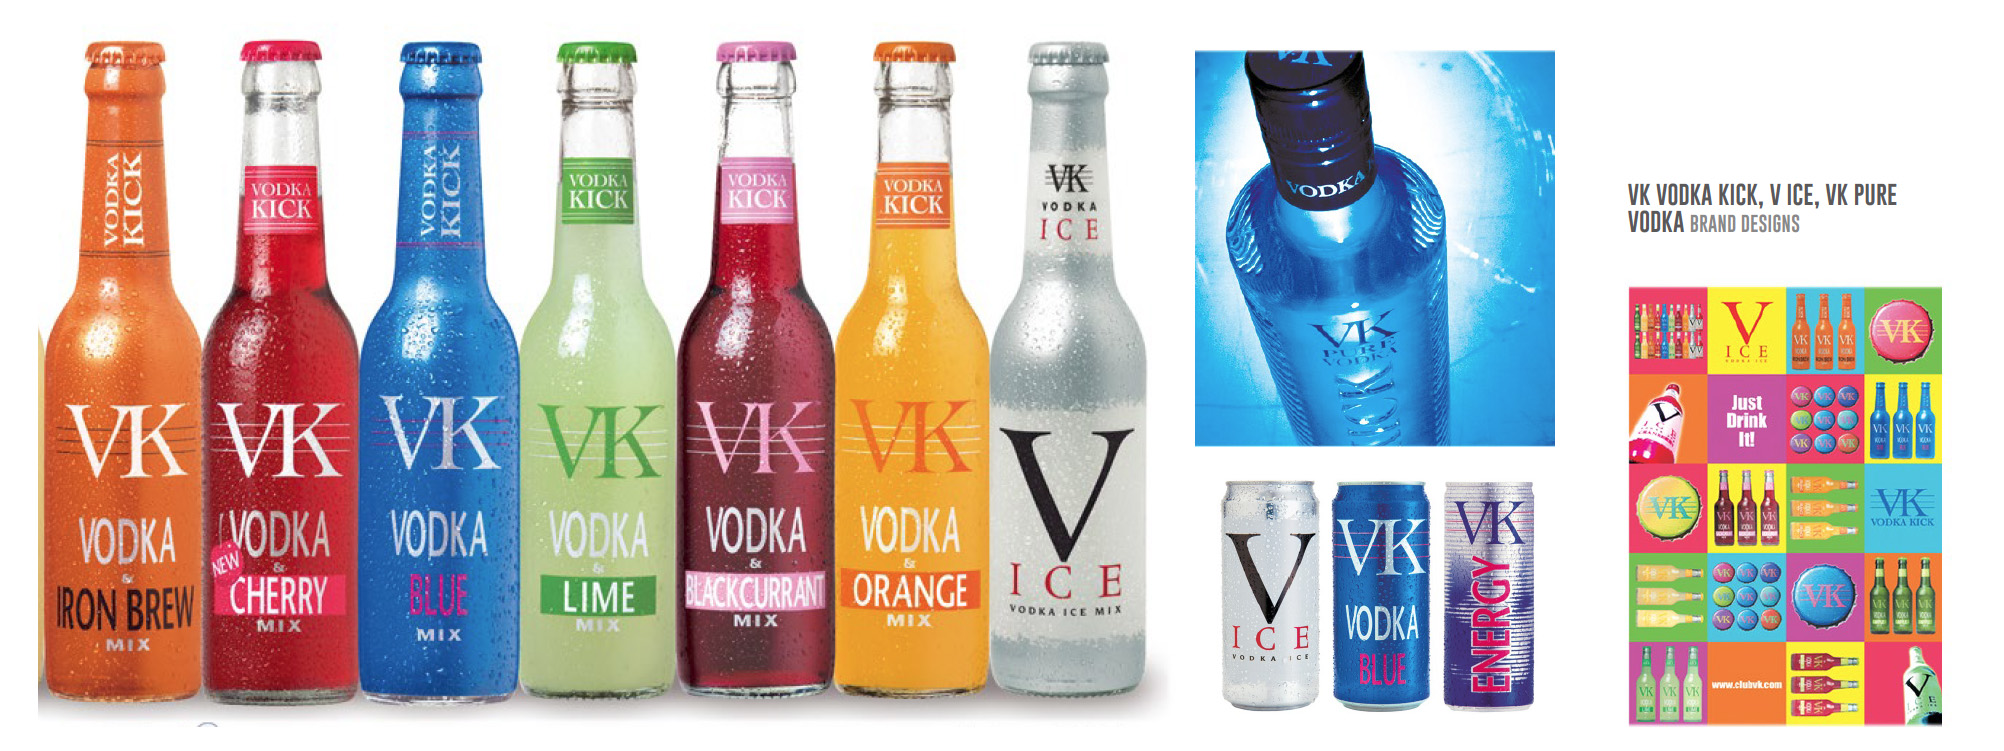 This is an image of designs and photography of VK Vodka Kick RTD drink bottles